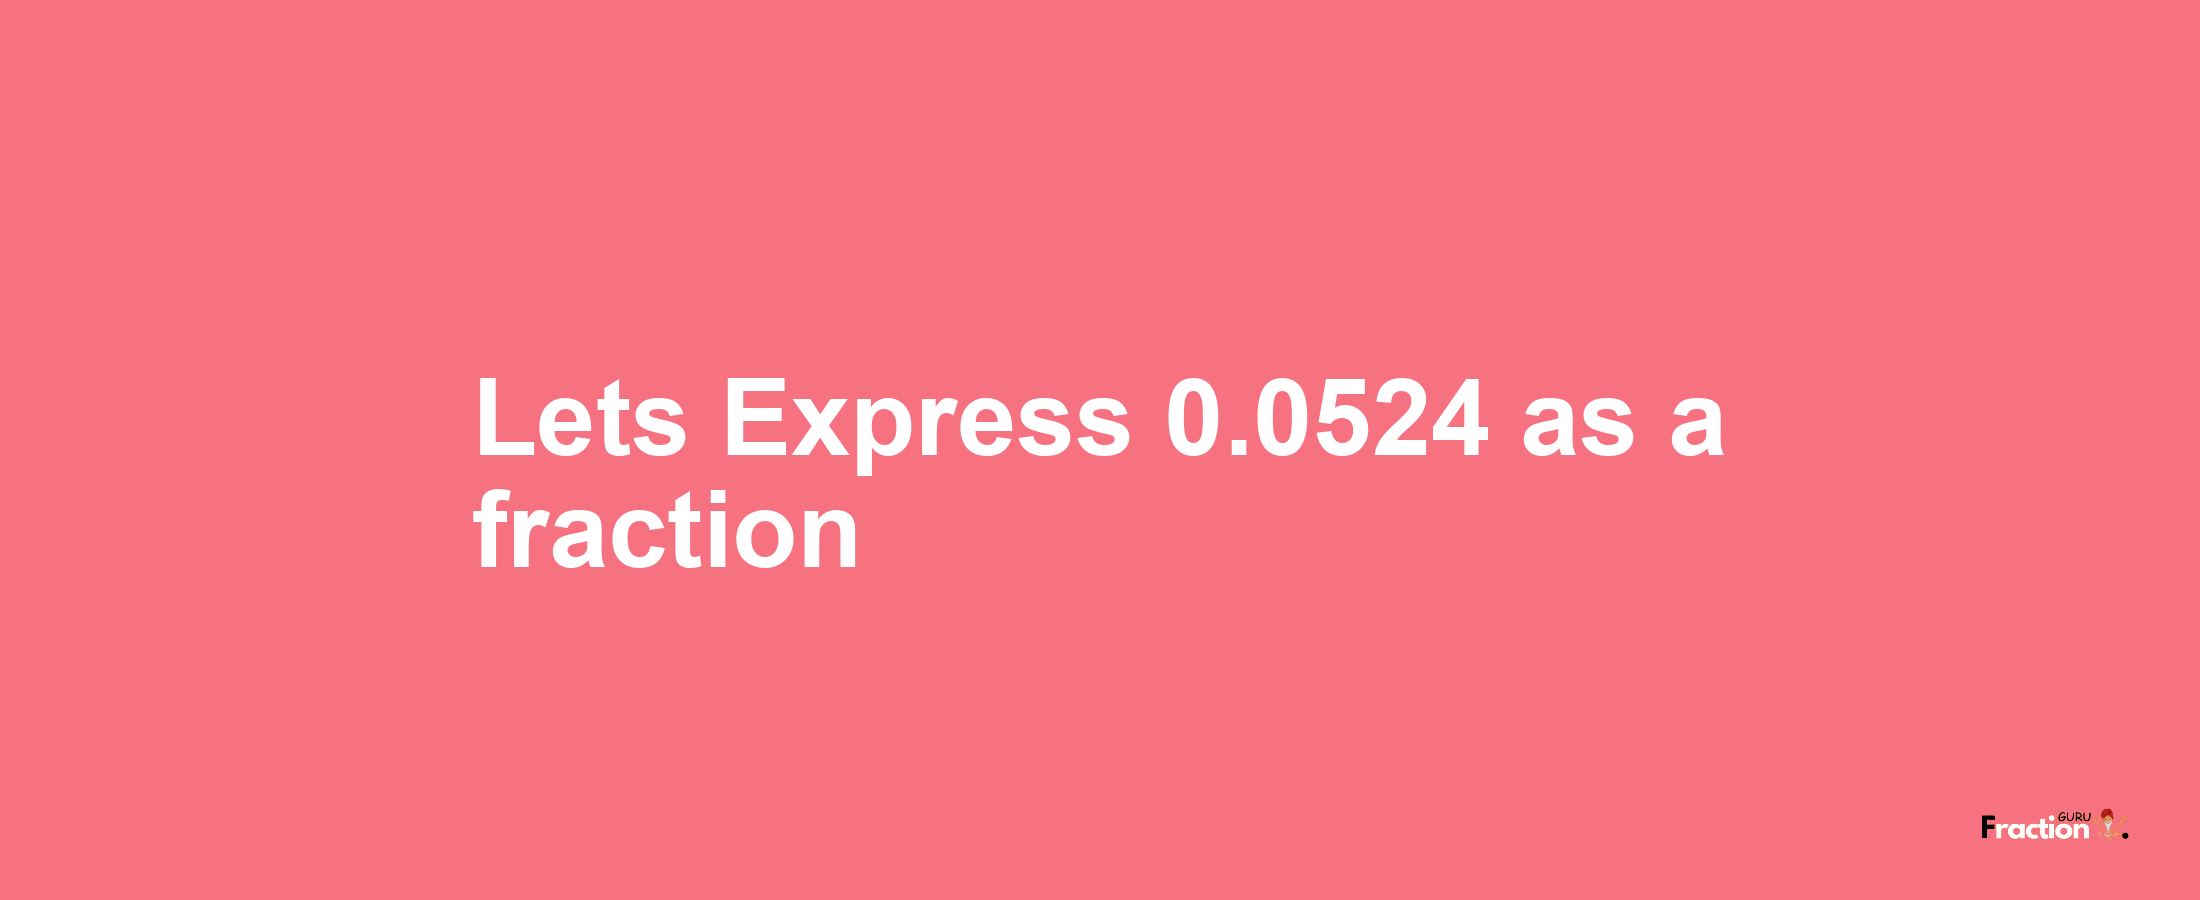 Lets Express 0.0524 as afraction